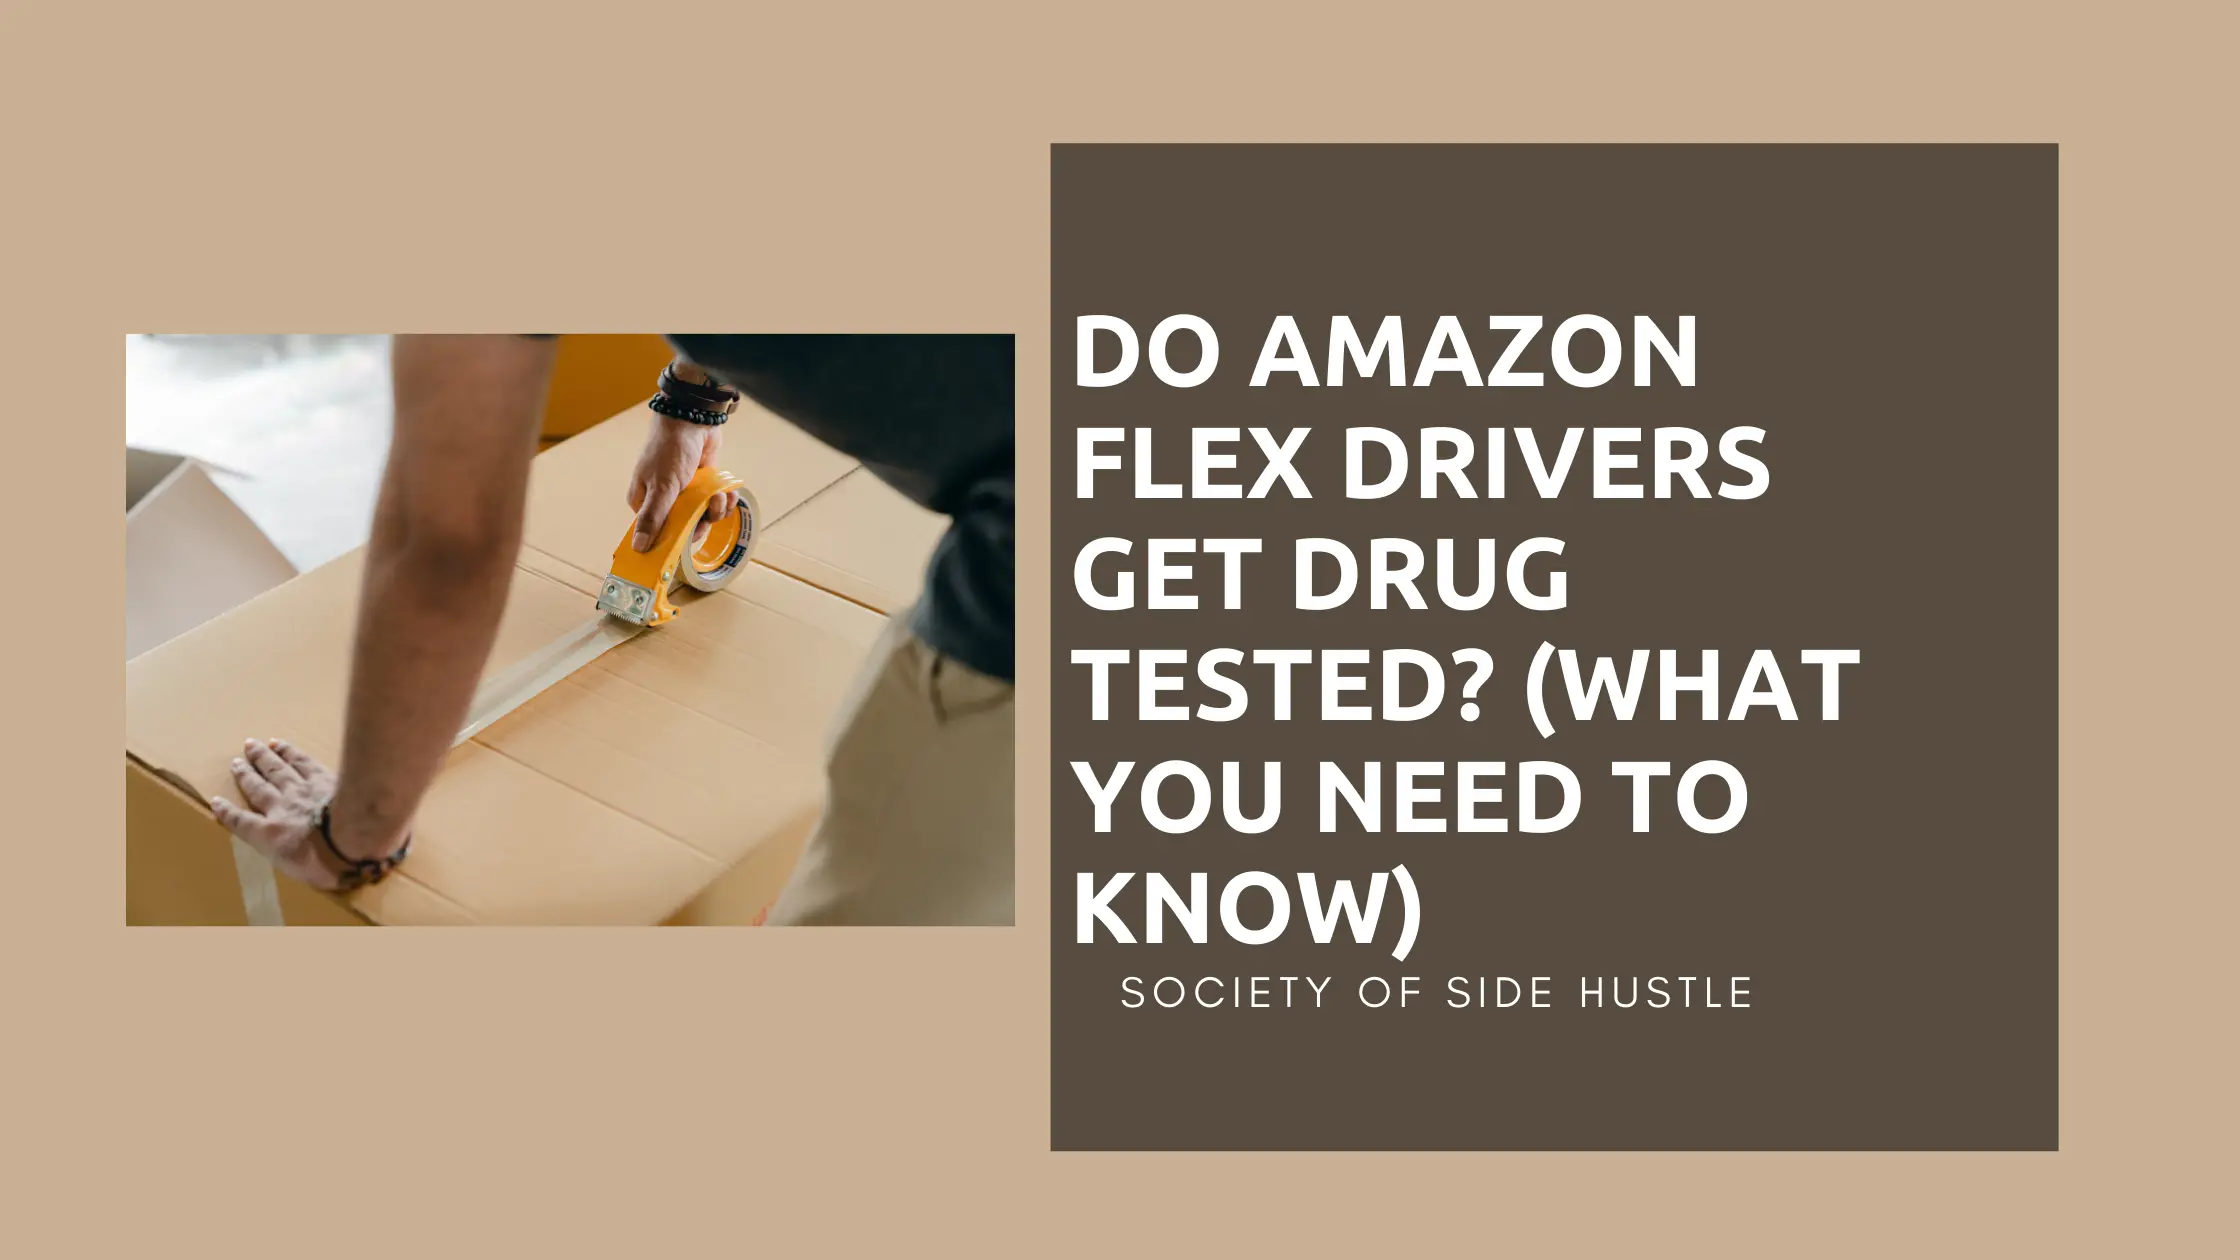 Do Amazon Flex Drivers Get Drug Tested? (What You Need To Know)